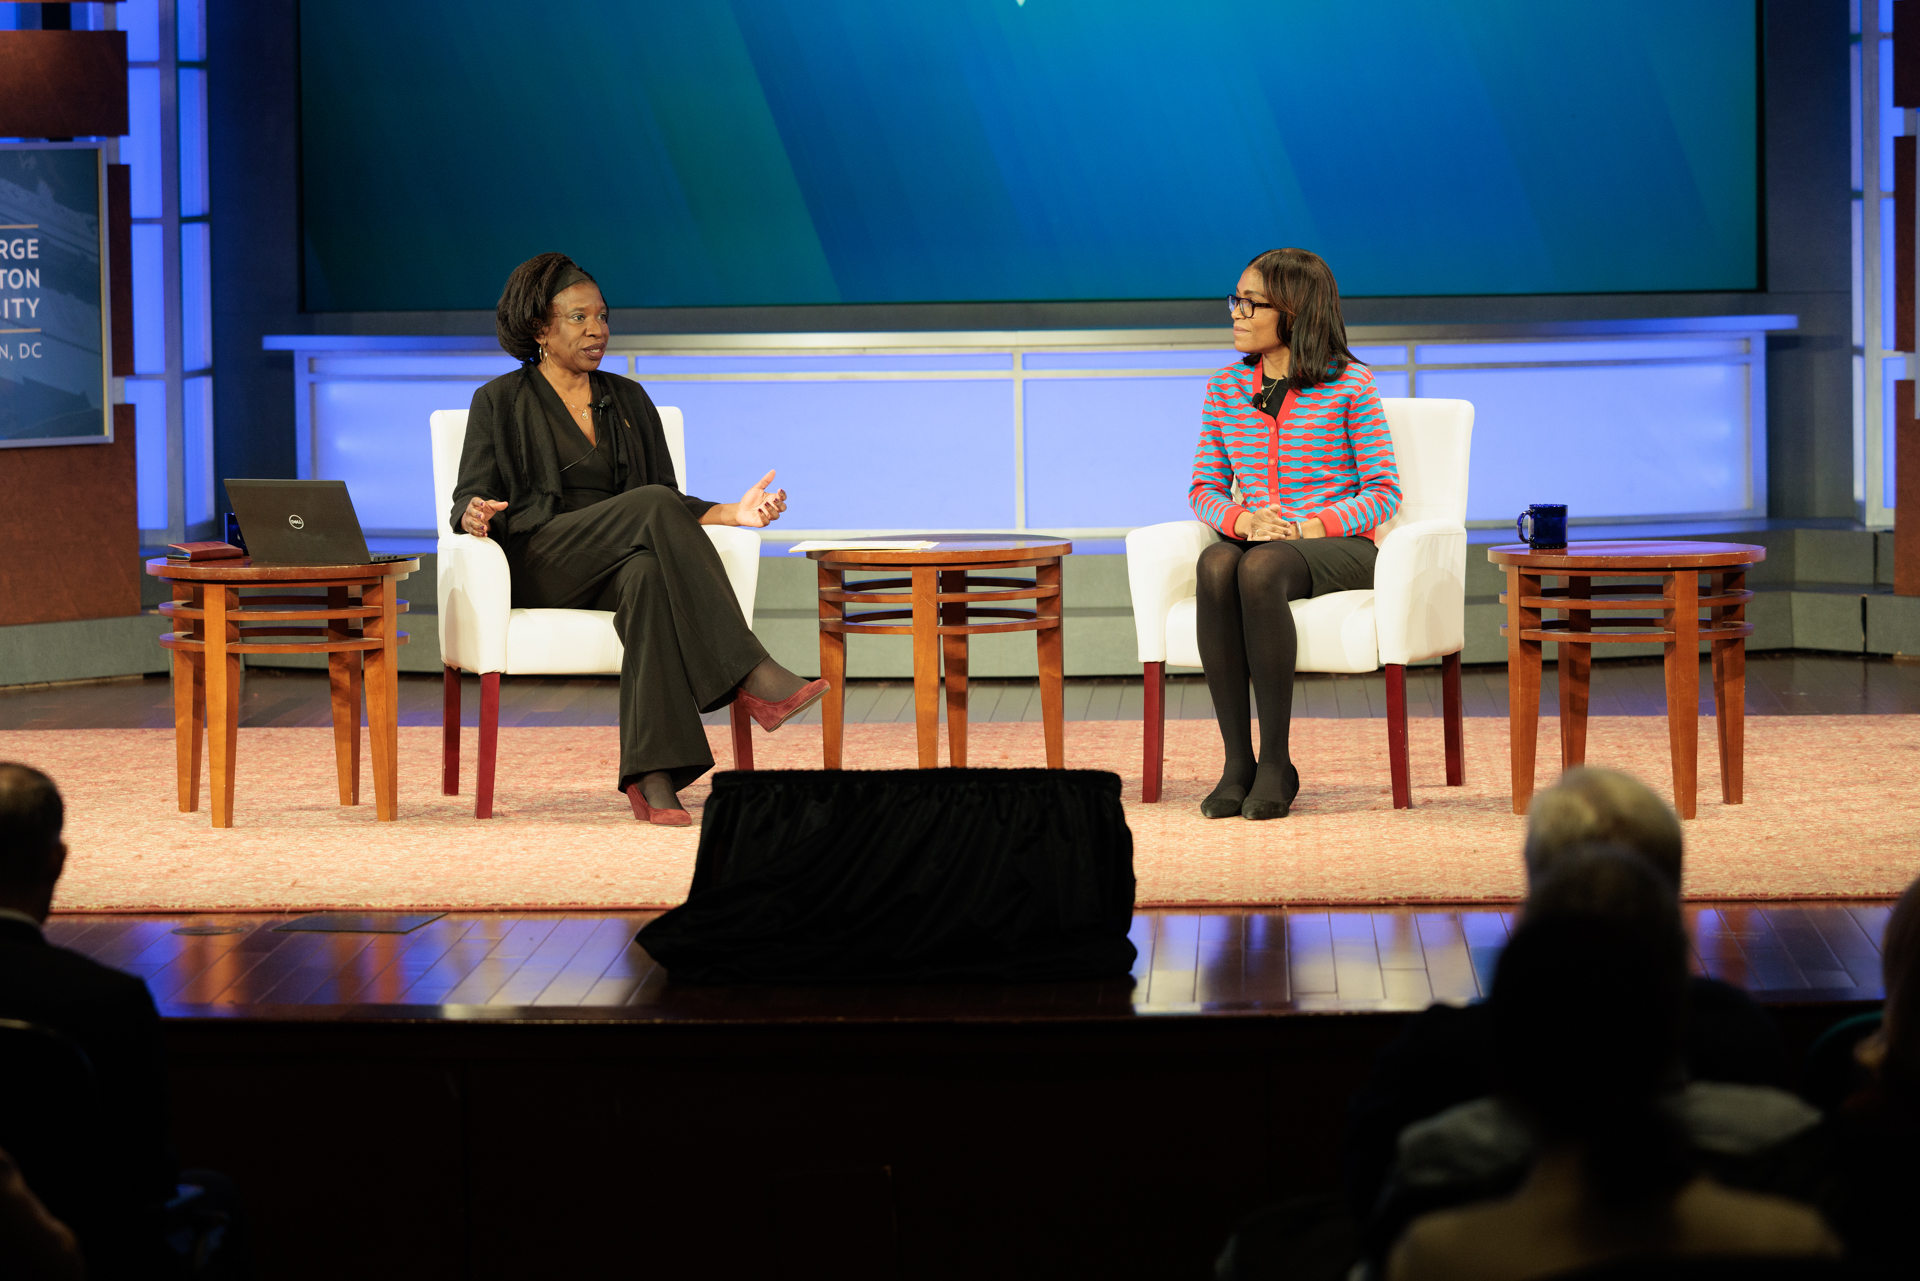 Senior VP Sharifa A. Anderson, chief diversity and inclusion officer at Fannie Mae, spoke with interim Dean Vanessa Perry about promoting values of diversity.